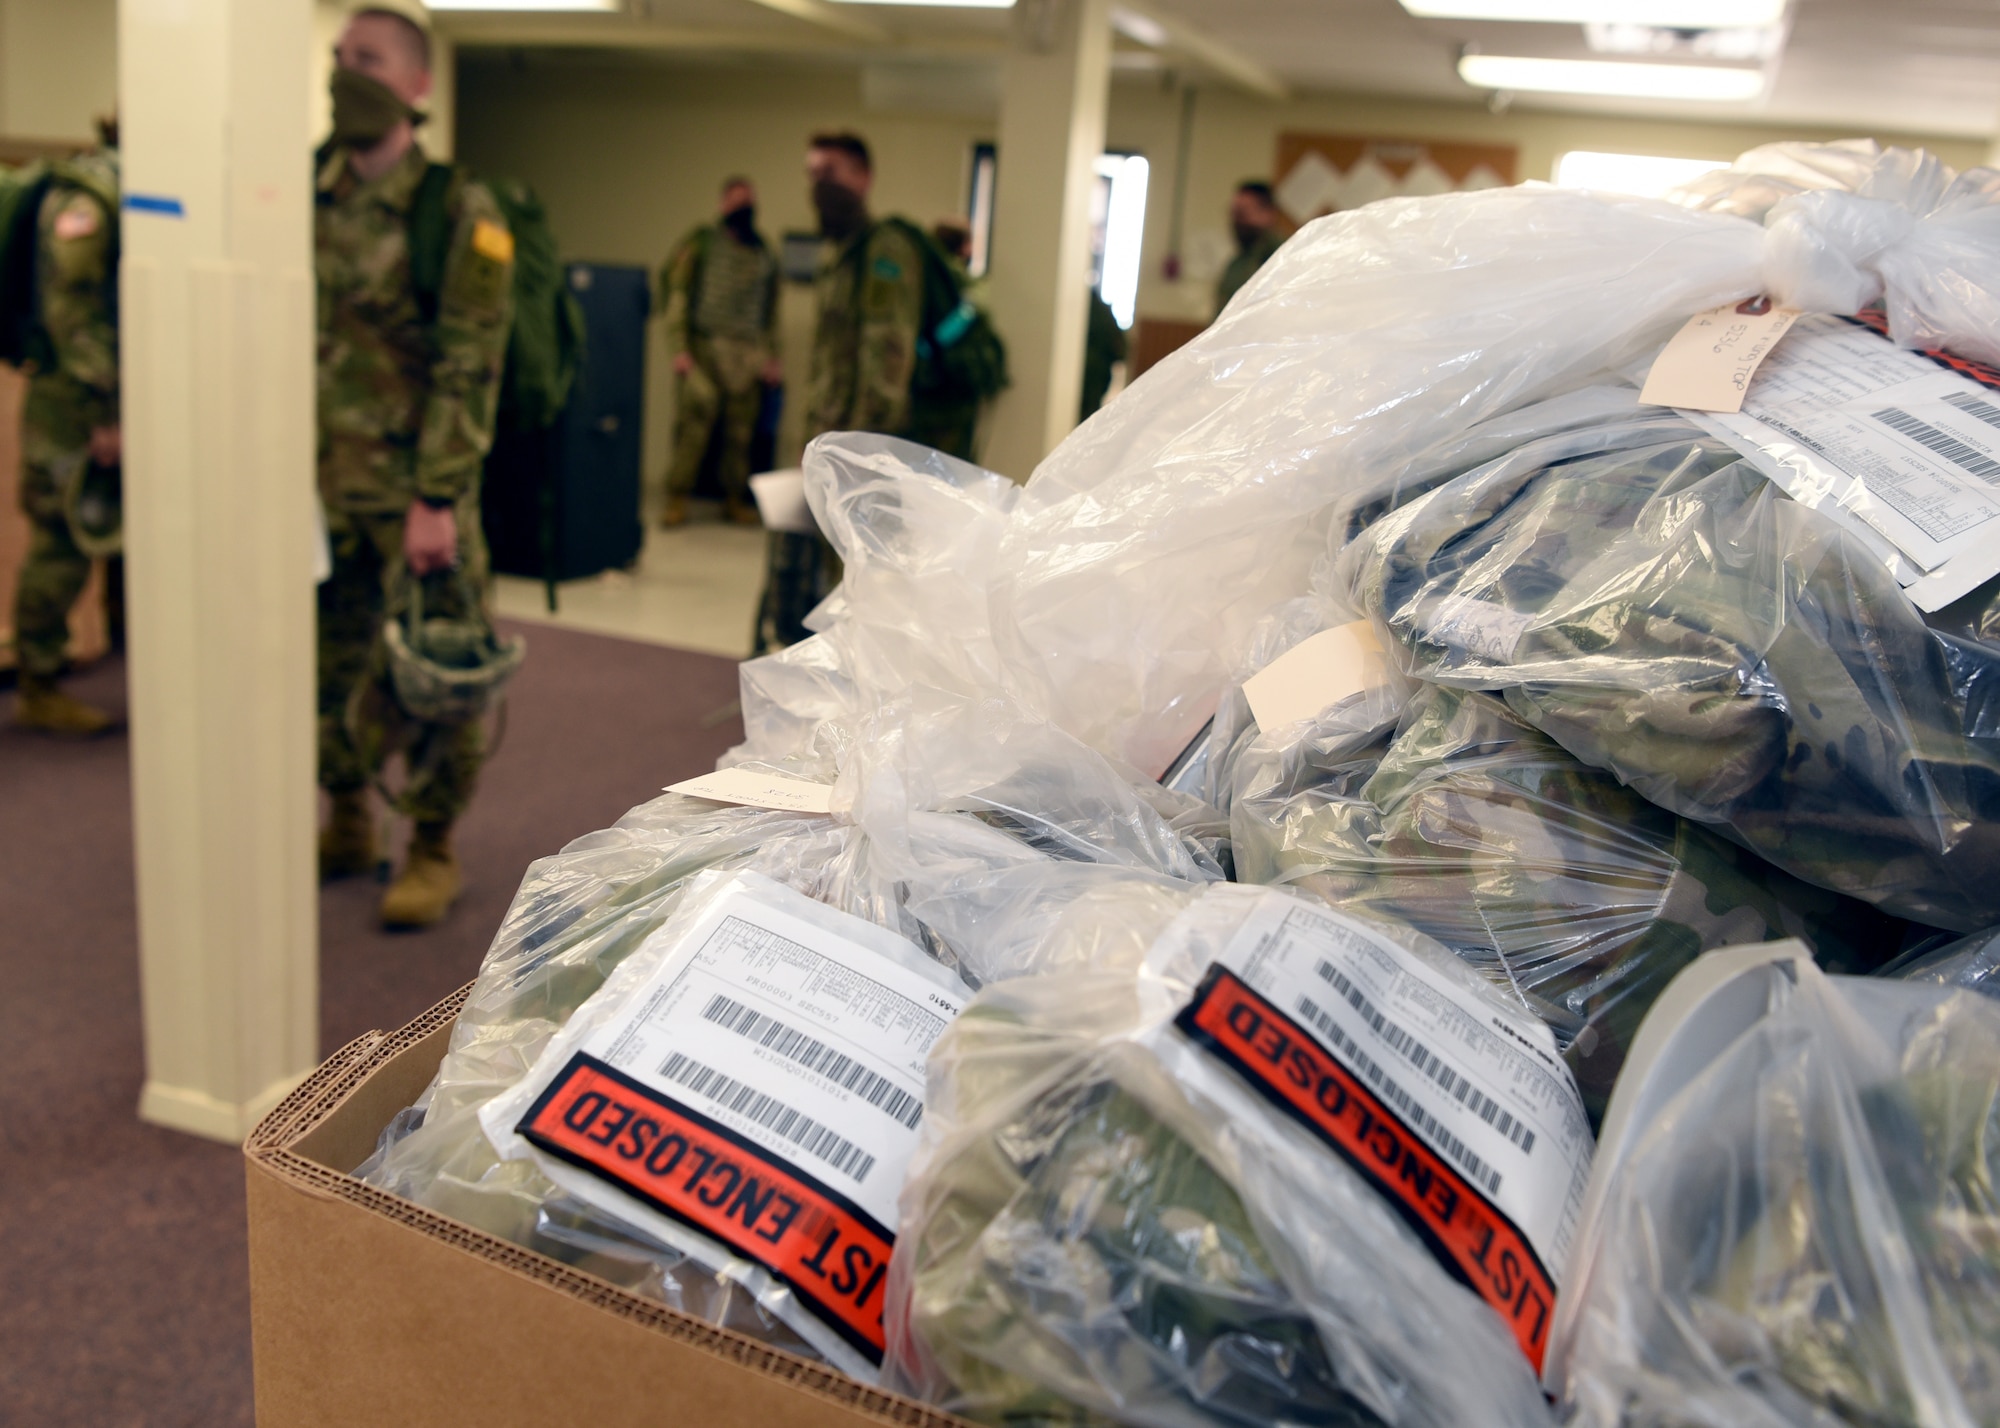 A bin of U.S. Army field exercise equipment is wrapped in plastic for organization and sanitation measures in the 344th Military Intelligence Battalion Supply building on Goodfellow Air Force Base, Texas, April 20, 2020. The Soldiers practiced COVID-19 preventative measures through social distancing and wearing masks, while maintaining mission essential operations. (U.S. Air Force photo by Airman 1st Class Abbey Rieves)